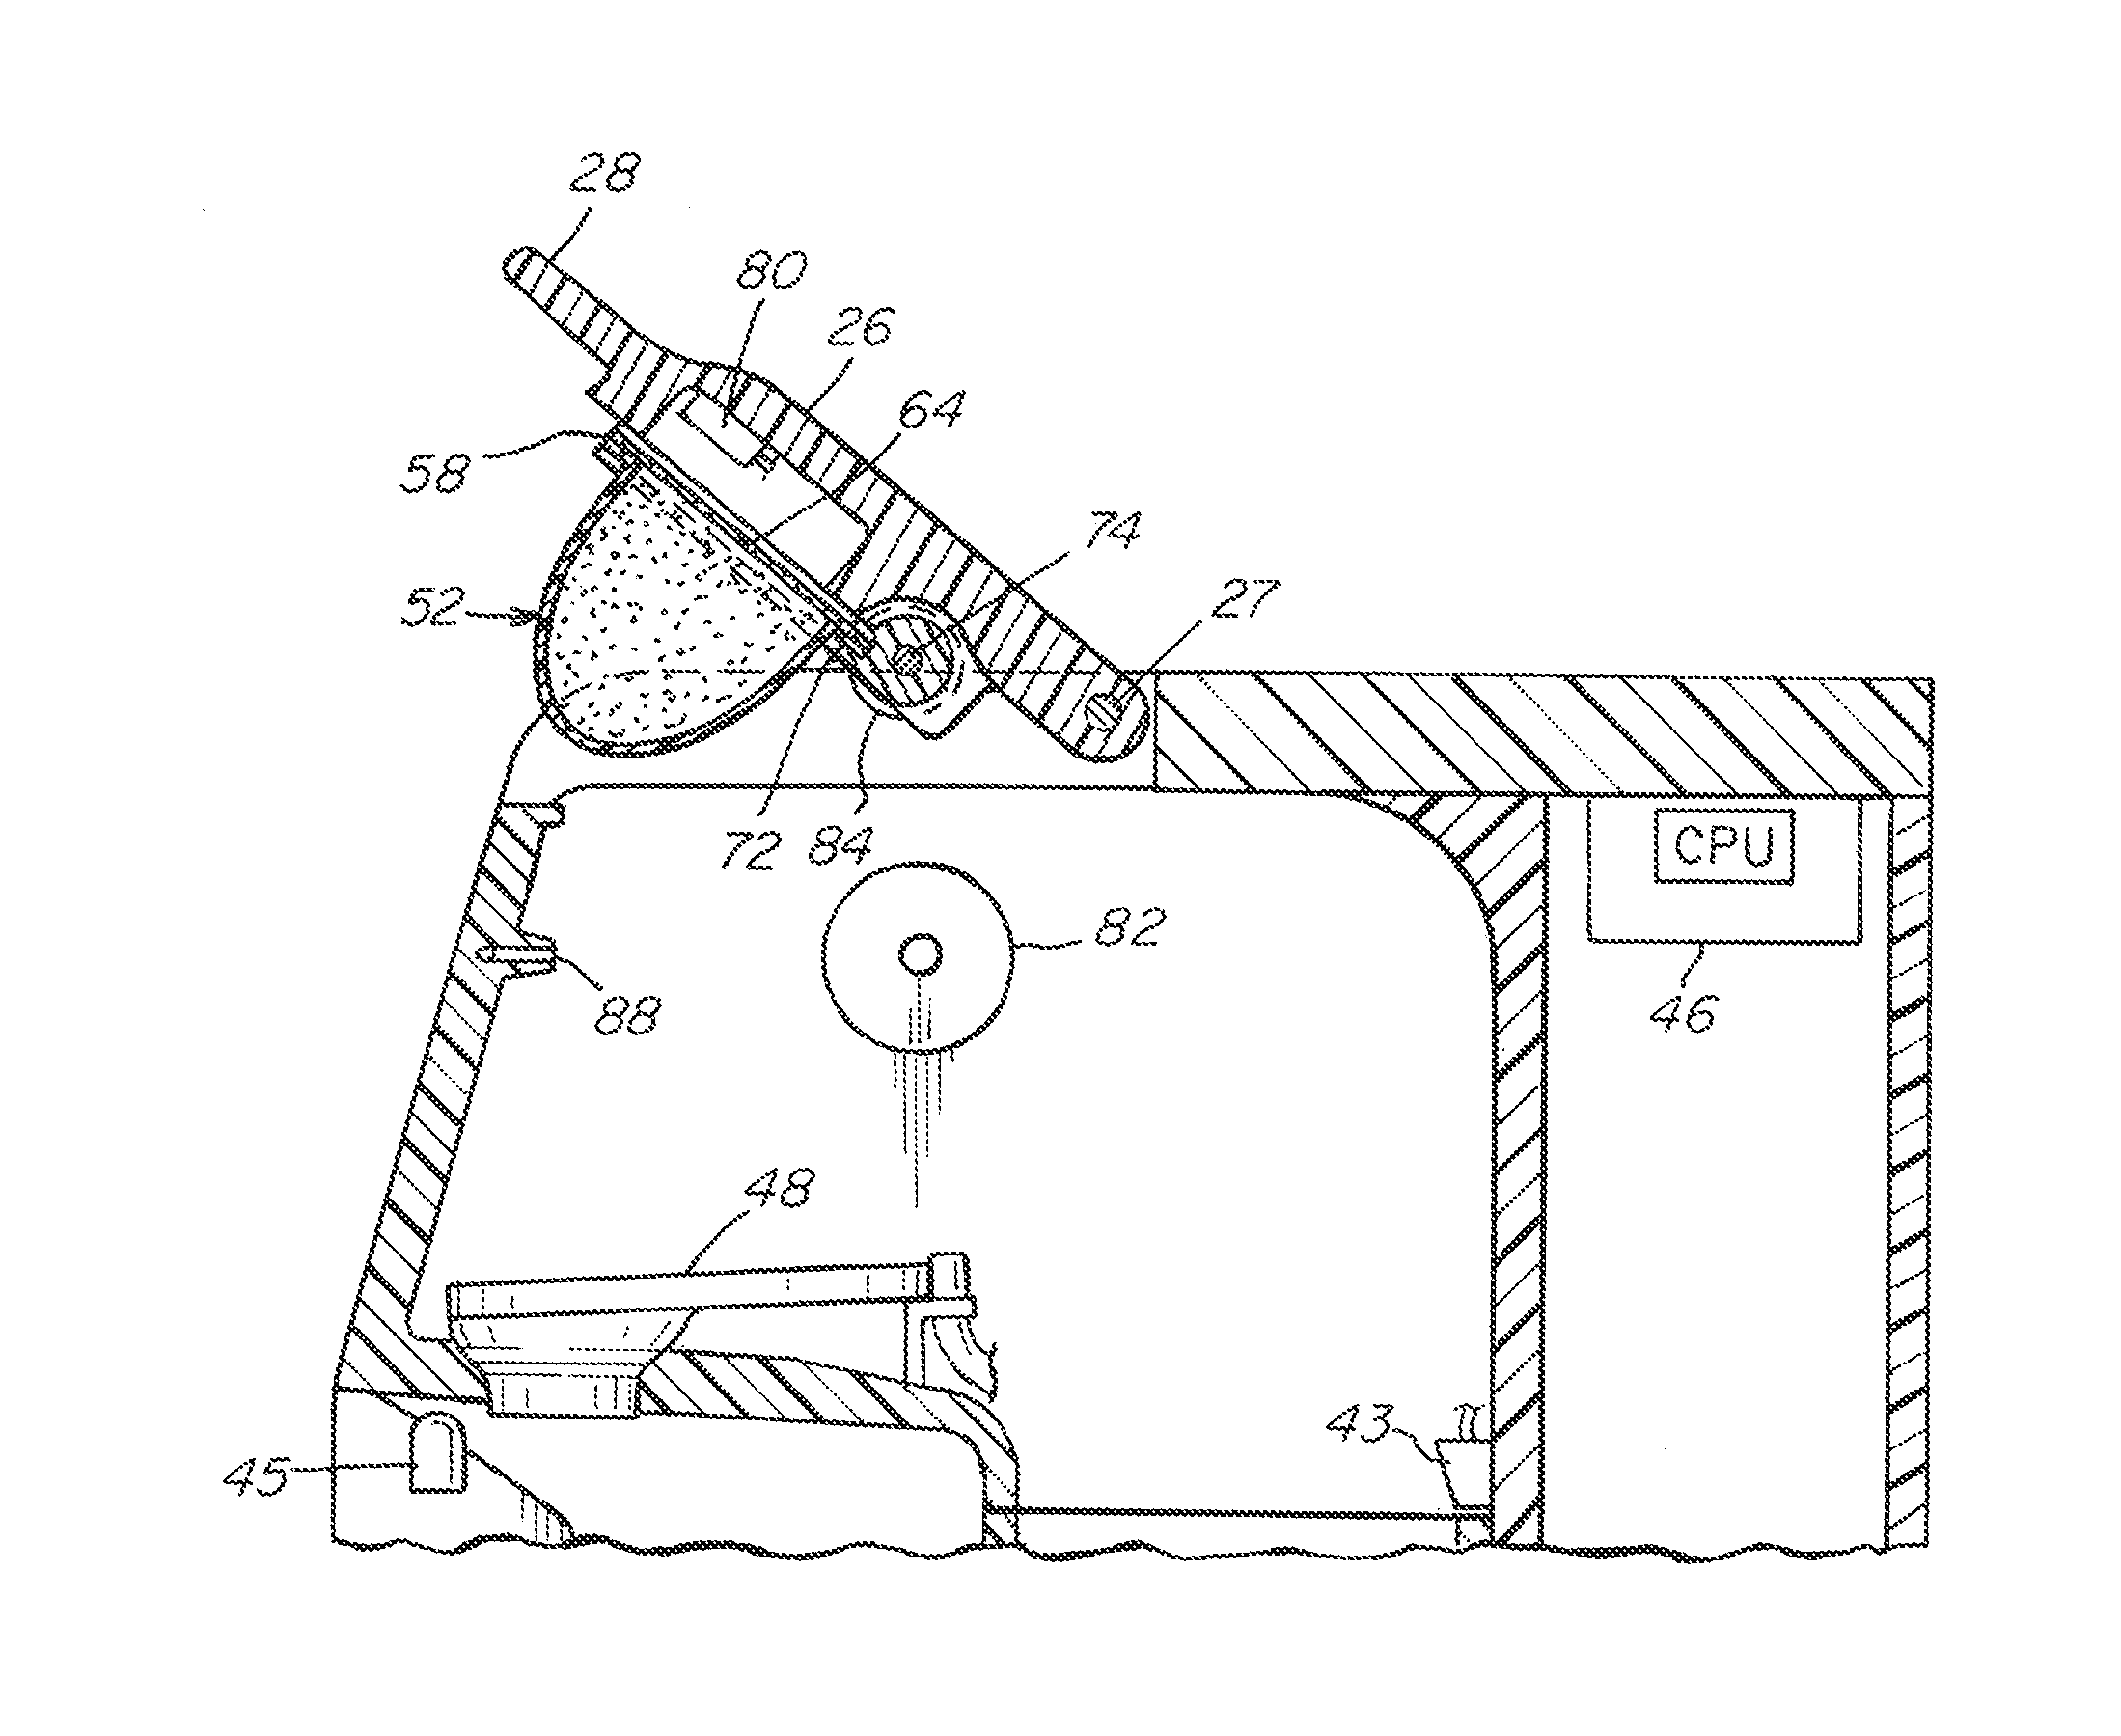 Capsule Based System for Preparing and Dispensing a Beverage